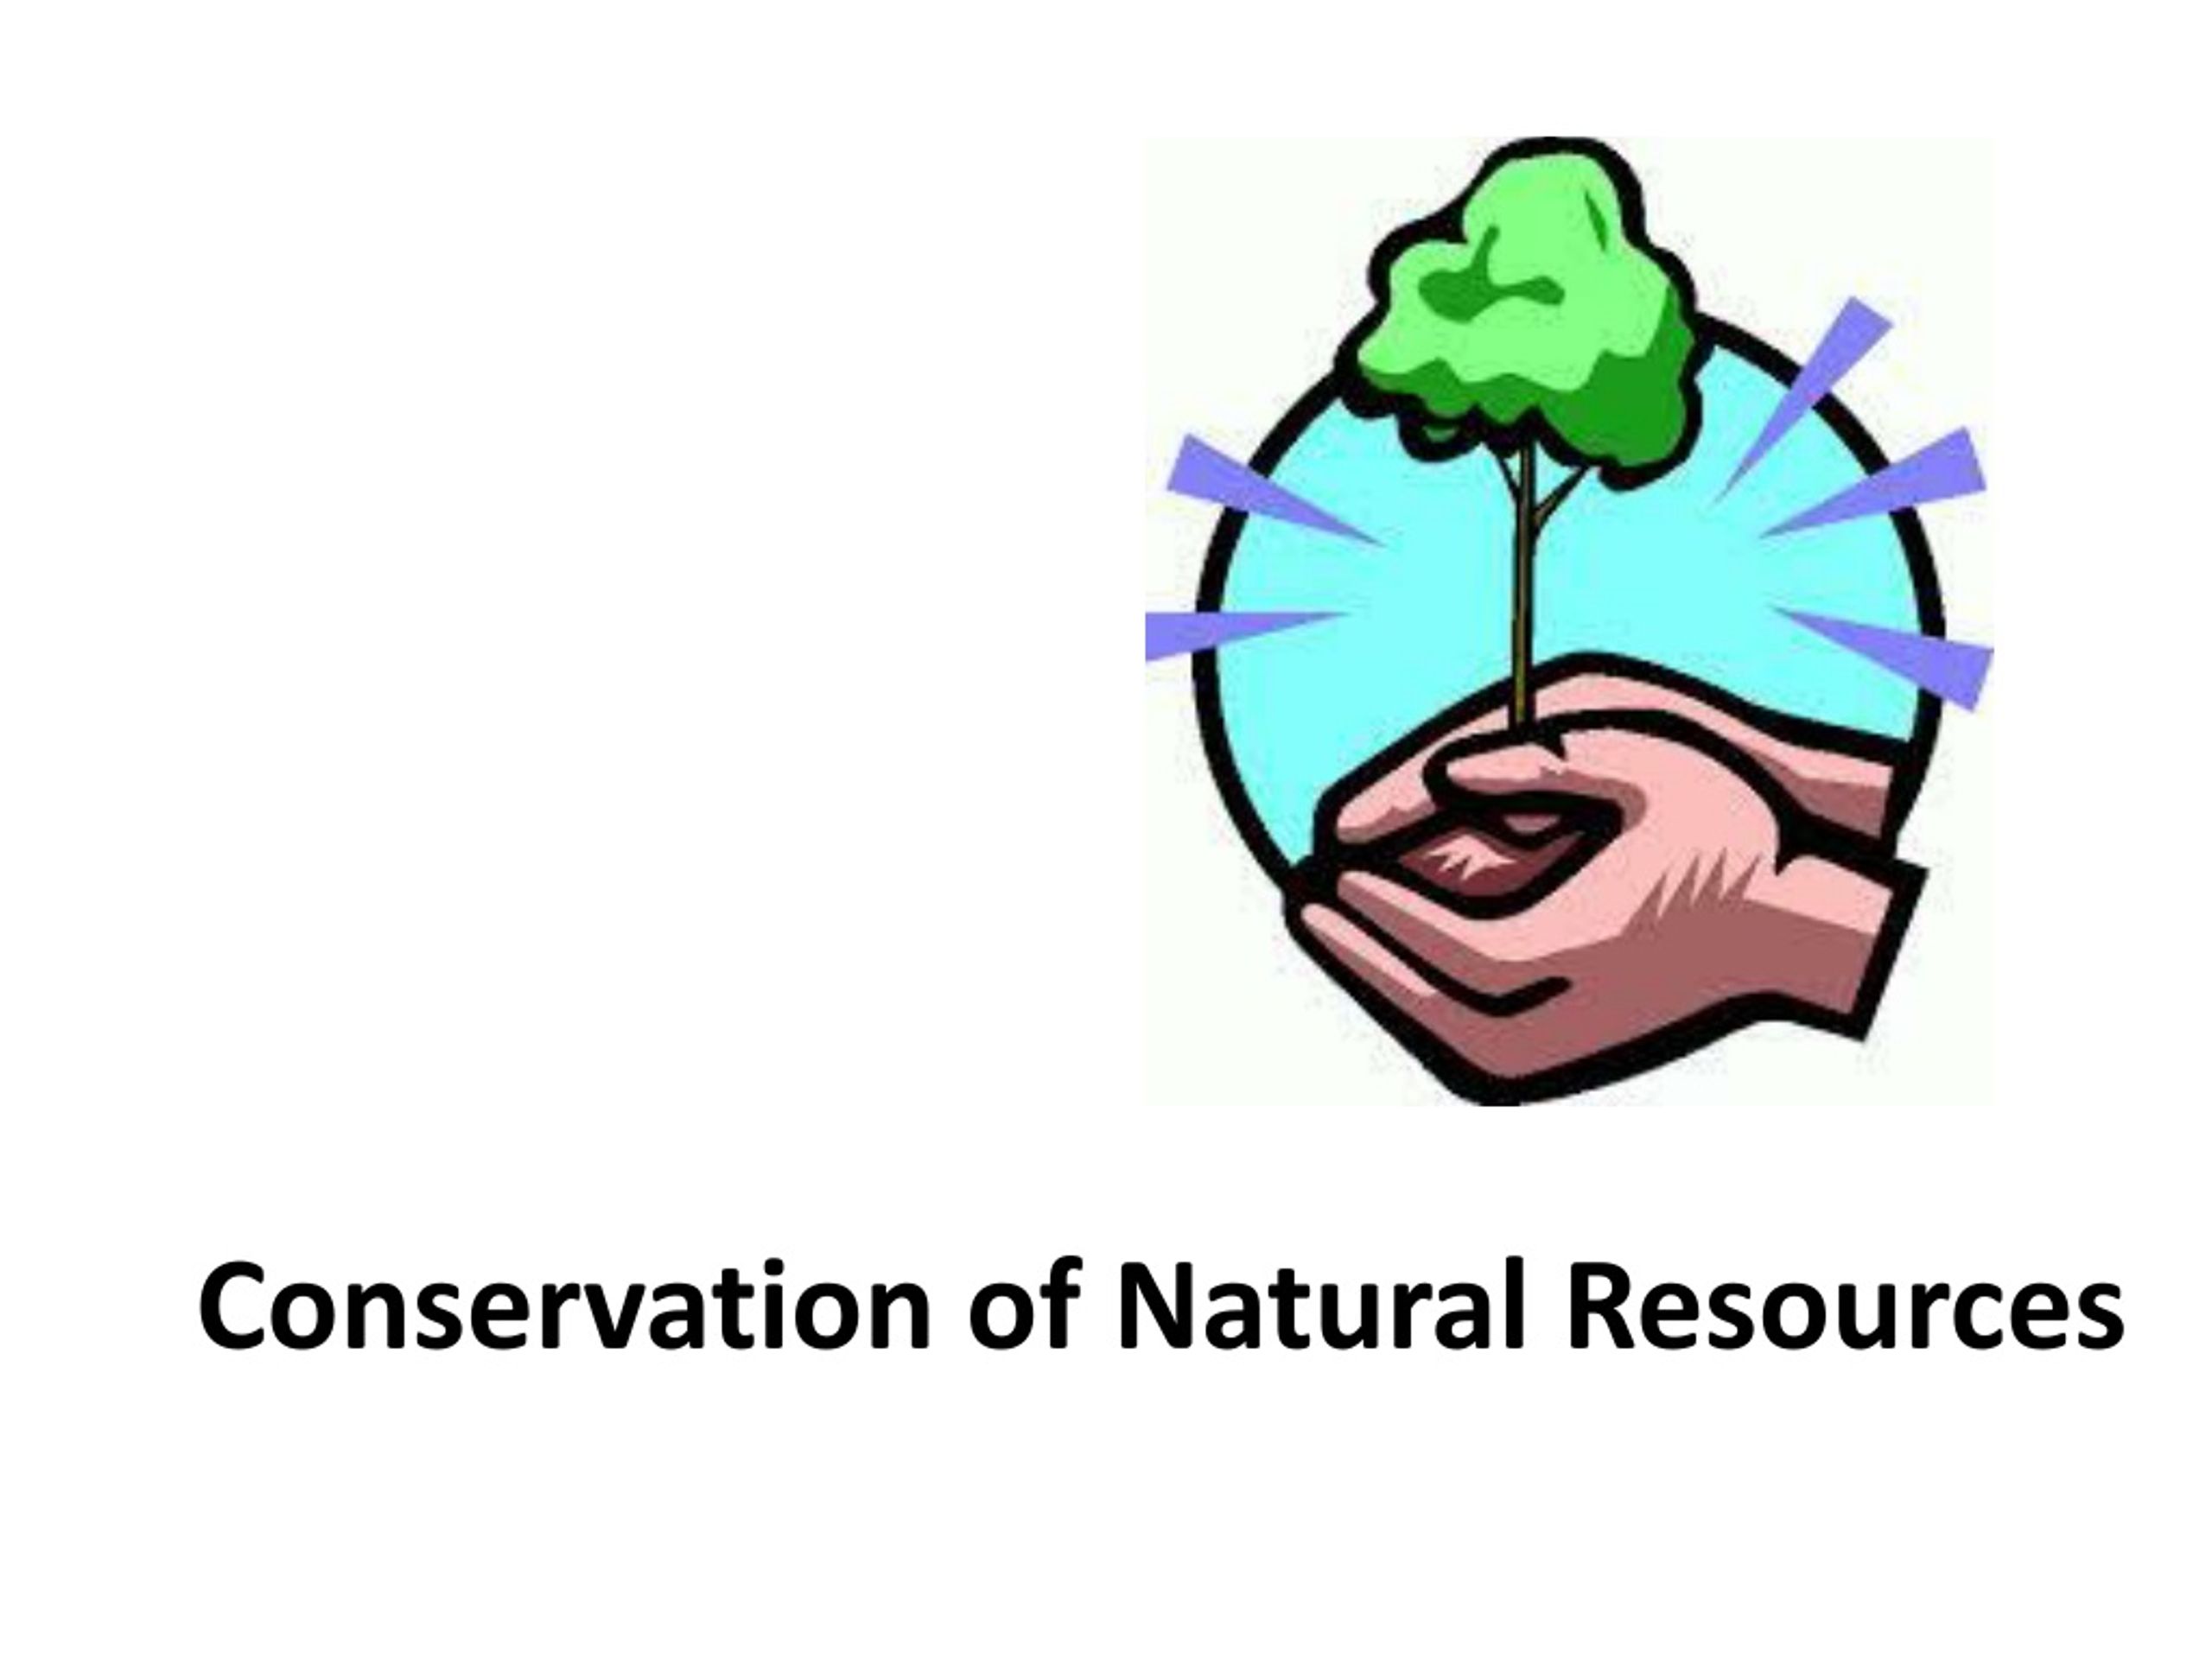 Natural conservation. Natural resources. Resource conserving. Utilization of natural resources презентация.